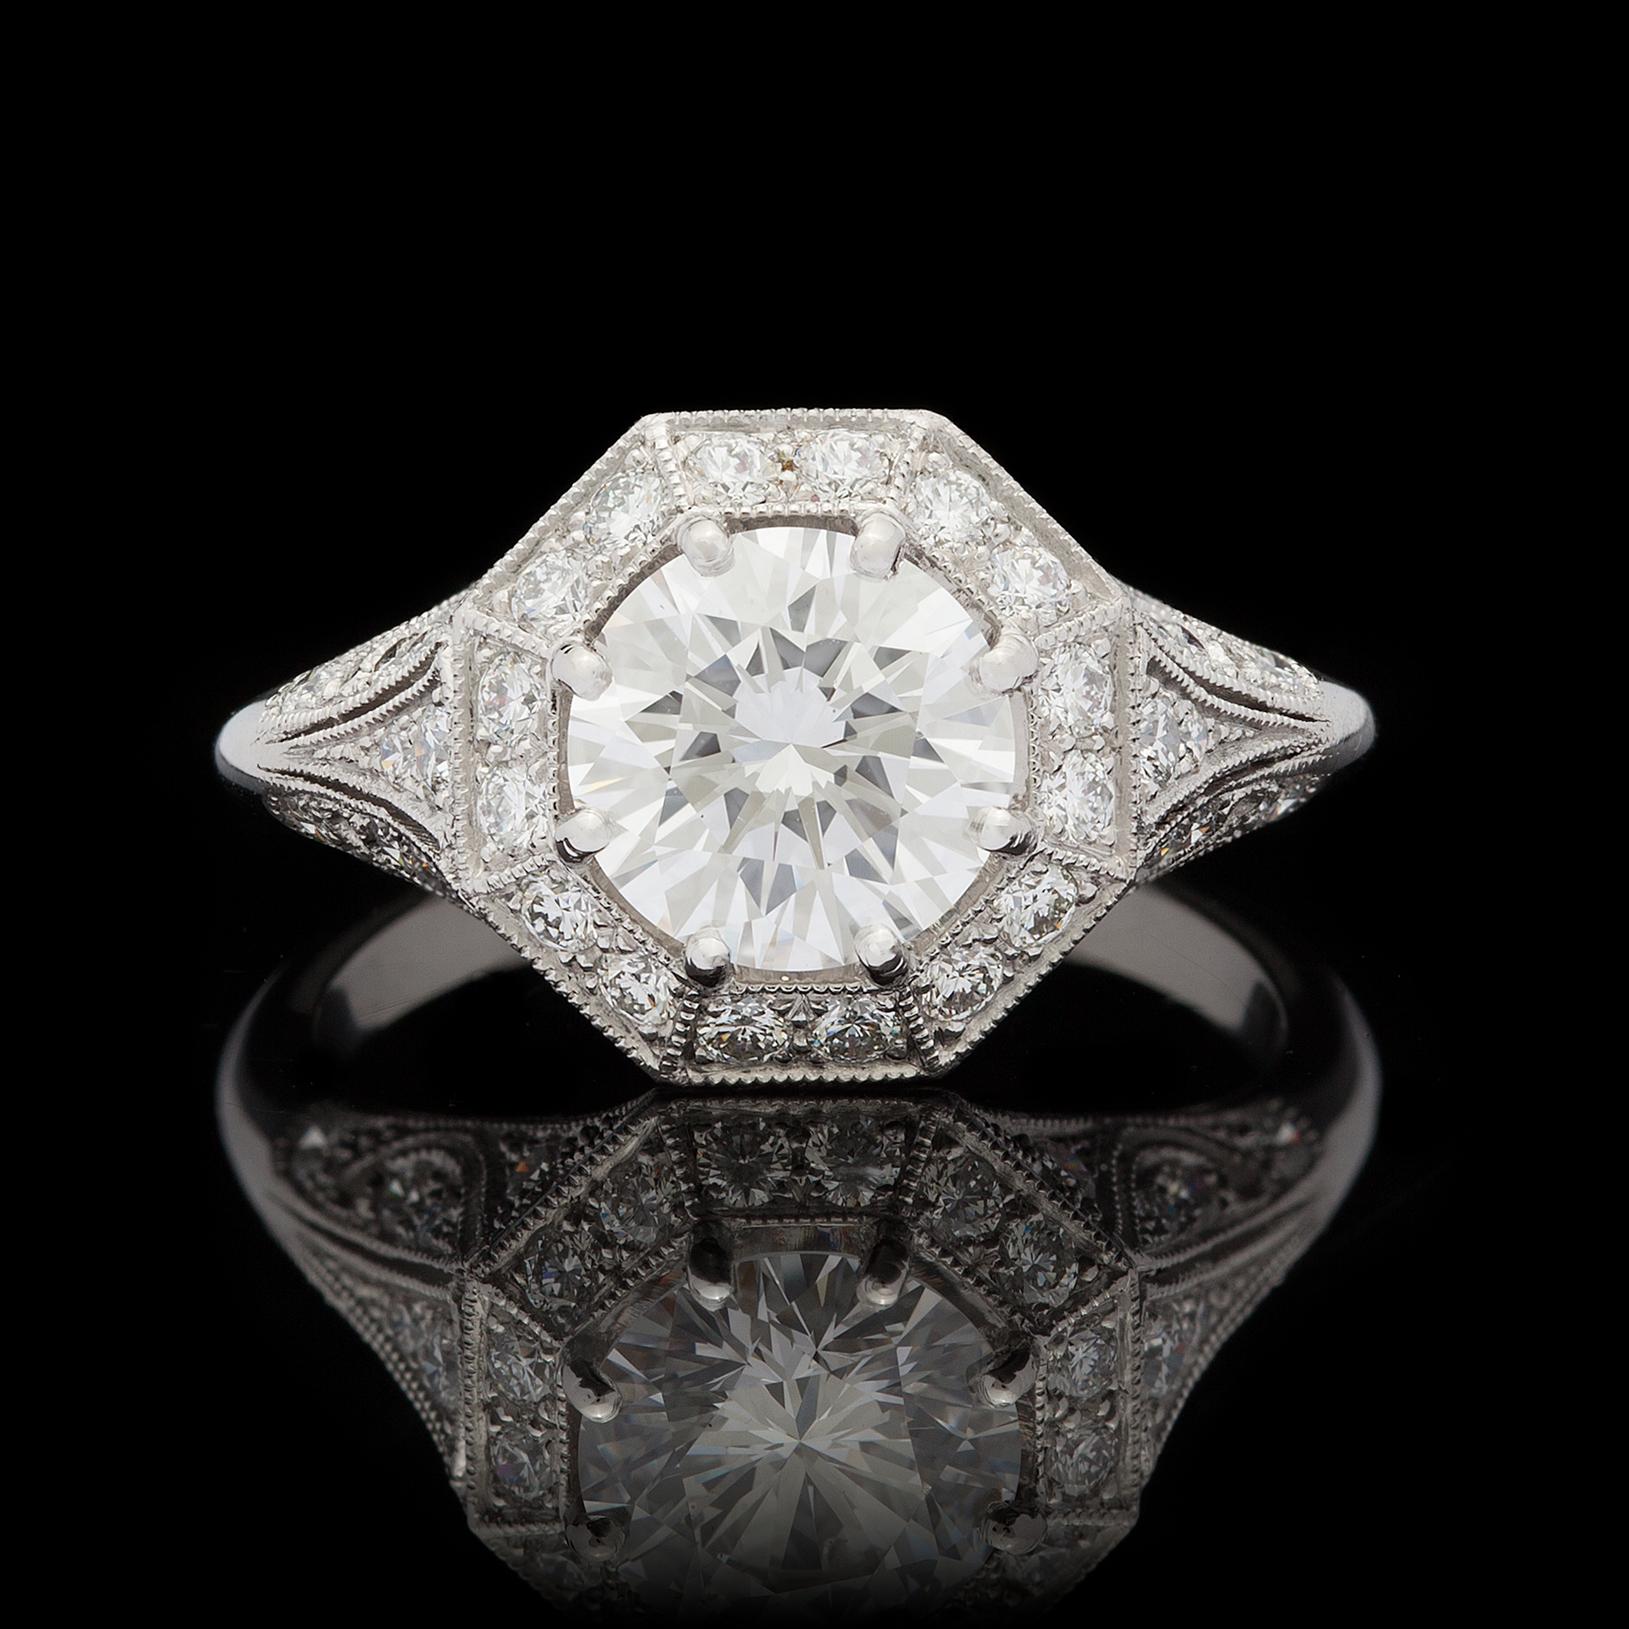 Exceptional design featuring a phenomenal center diamond. This custom French platinum ring by acclaimed designer Sebastien Barier features a 1.53 carat round brilliant cut diamond accented by an octagonal pave diamond border and diamond accented